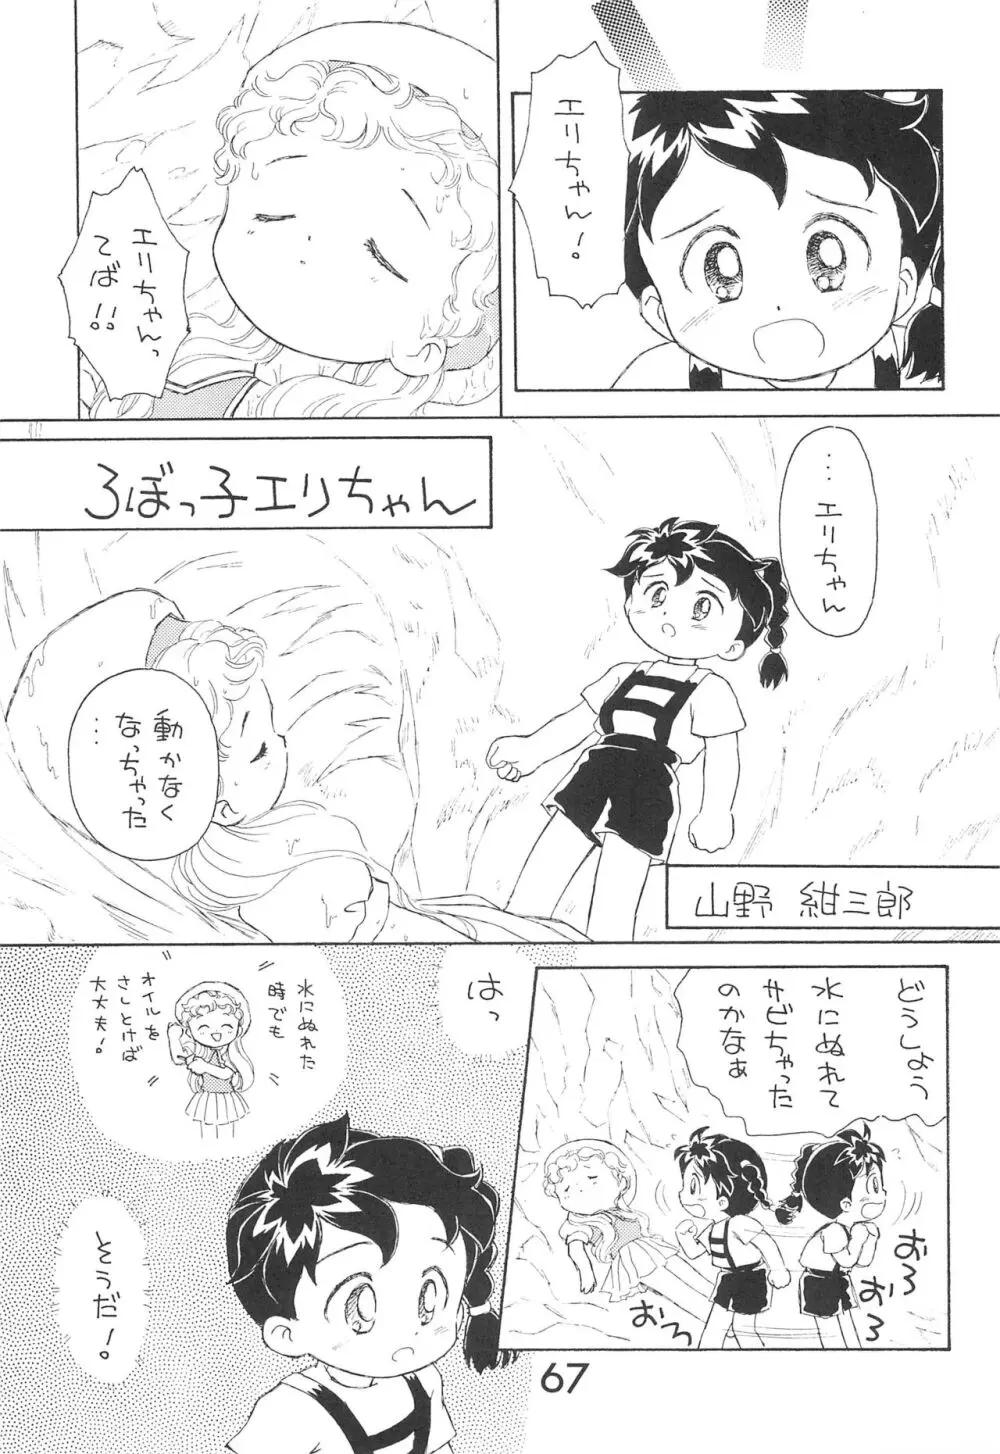 Fun House 9th Chame! - page67